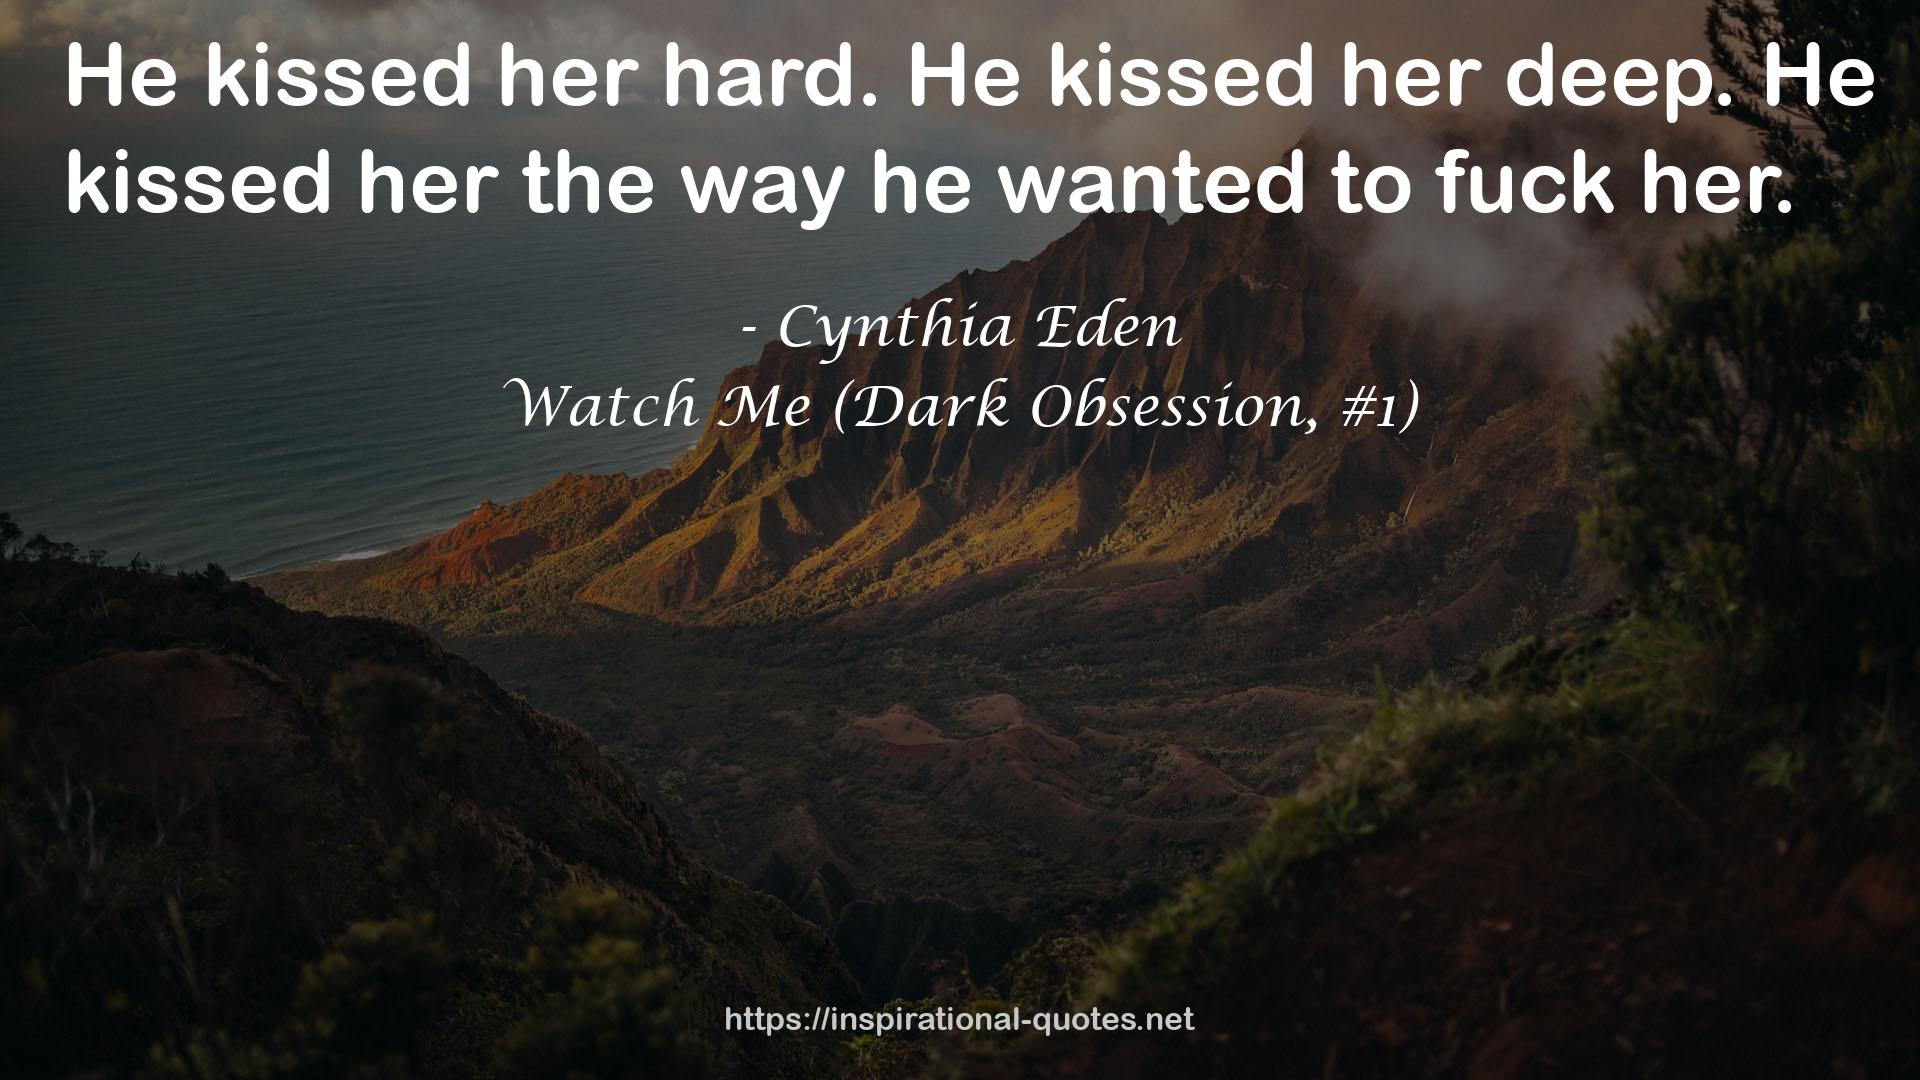 Watch Me (Dark Obsession, #1) QUOTES